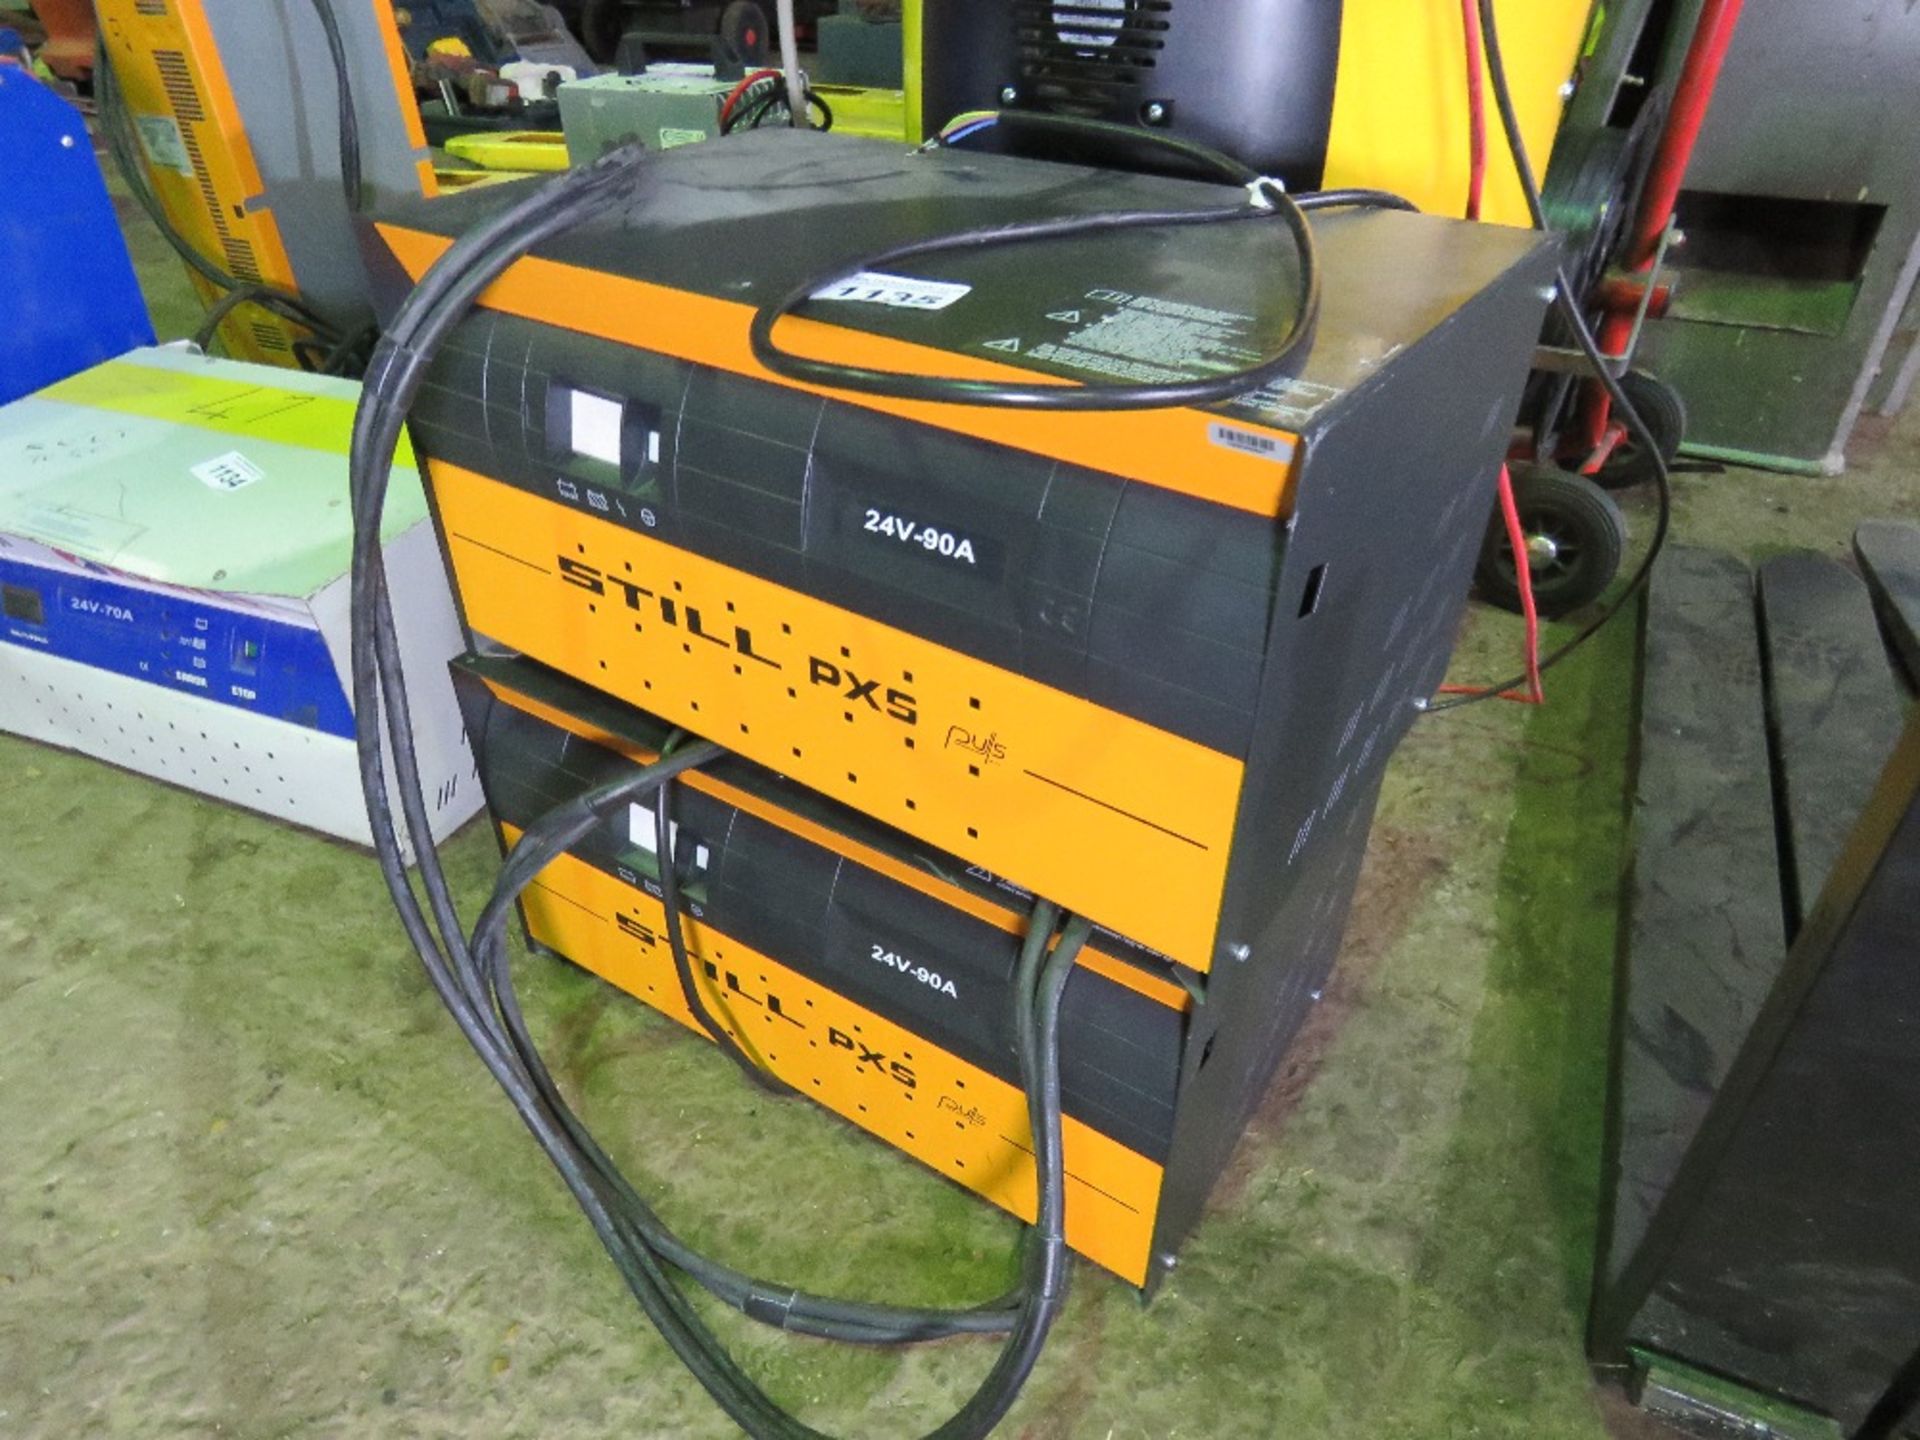 2 X STILL PX5 24V-90A FORKLIFT TYPE BATTERY CHARGERS, 240VOLT INPUT. SOURCED FROM COMPANY LIQUIDATIO - Image 2 of 4